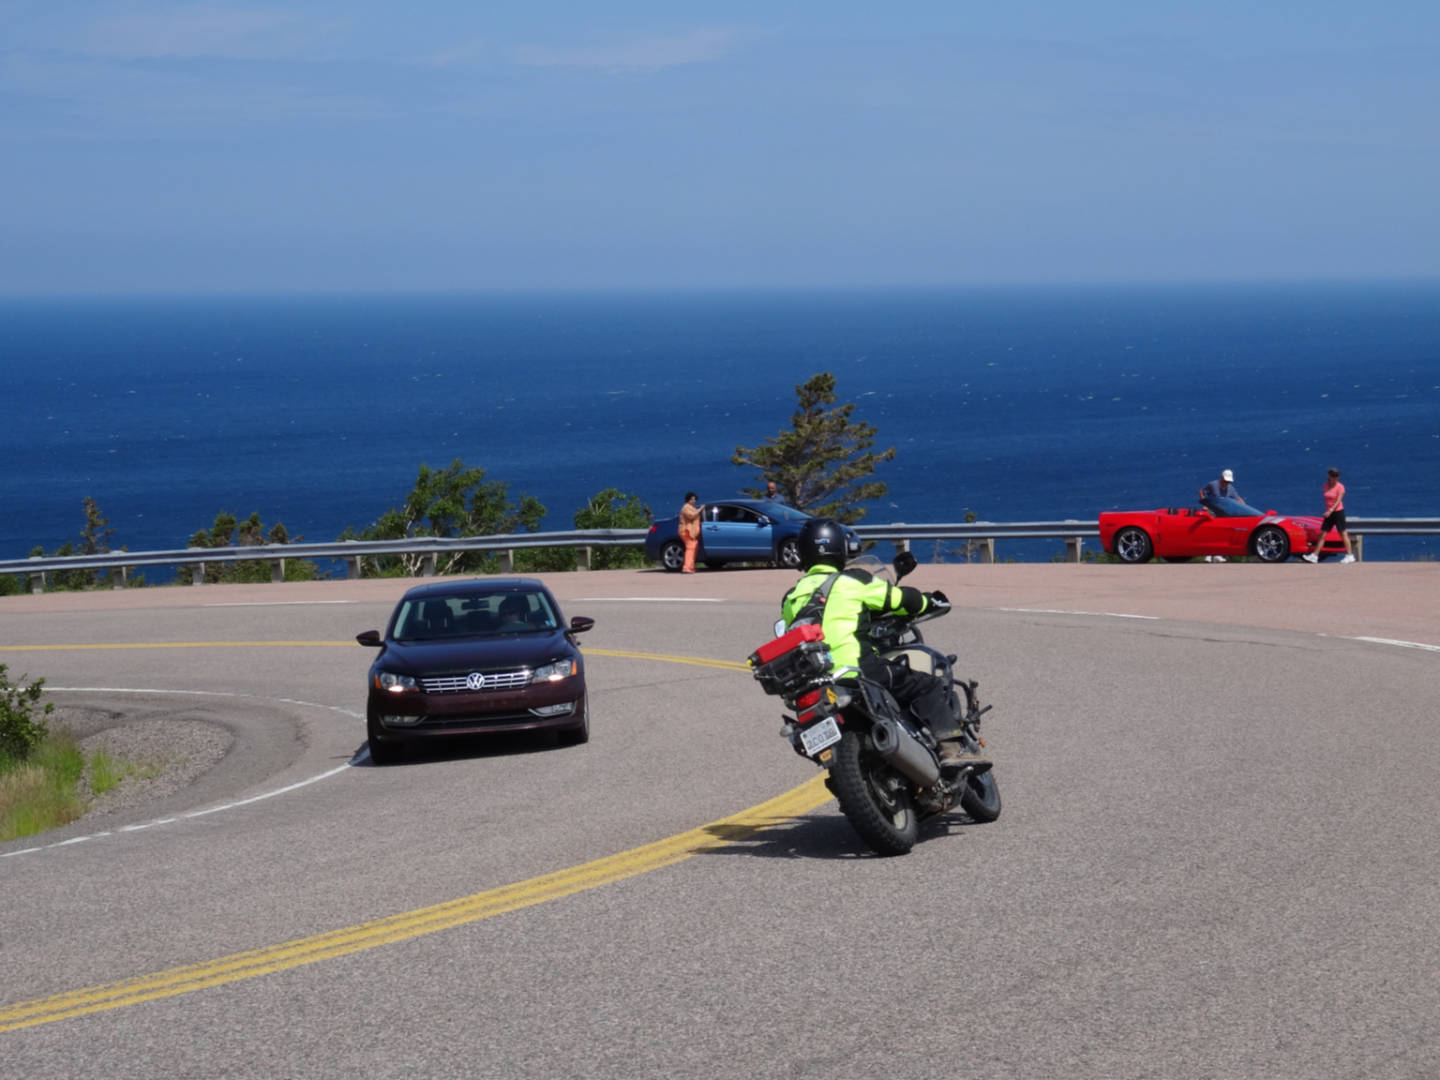 A photo of advjoe riding a motorcycle on the Cabot Trail